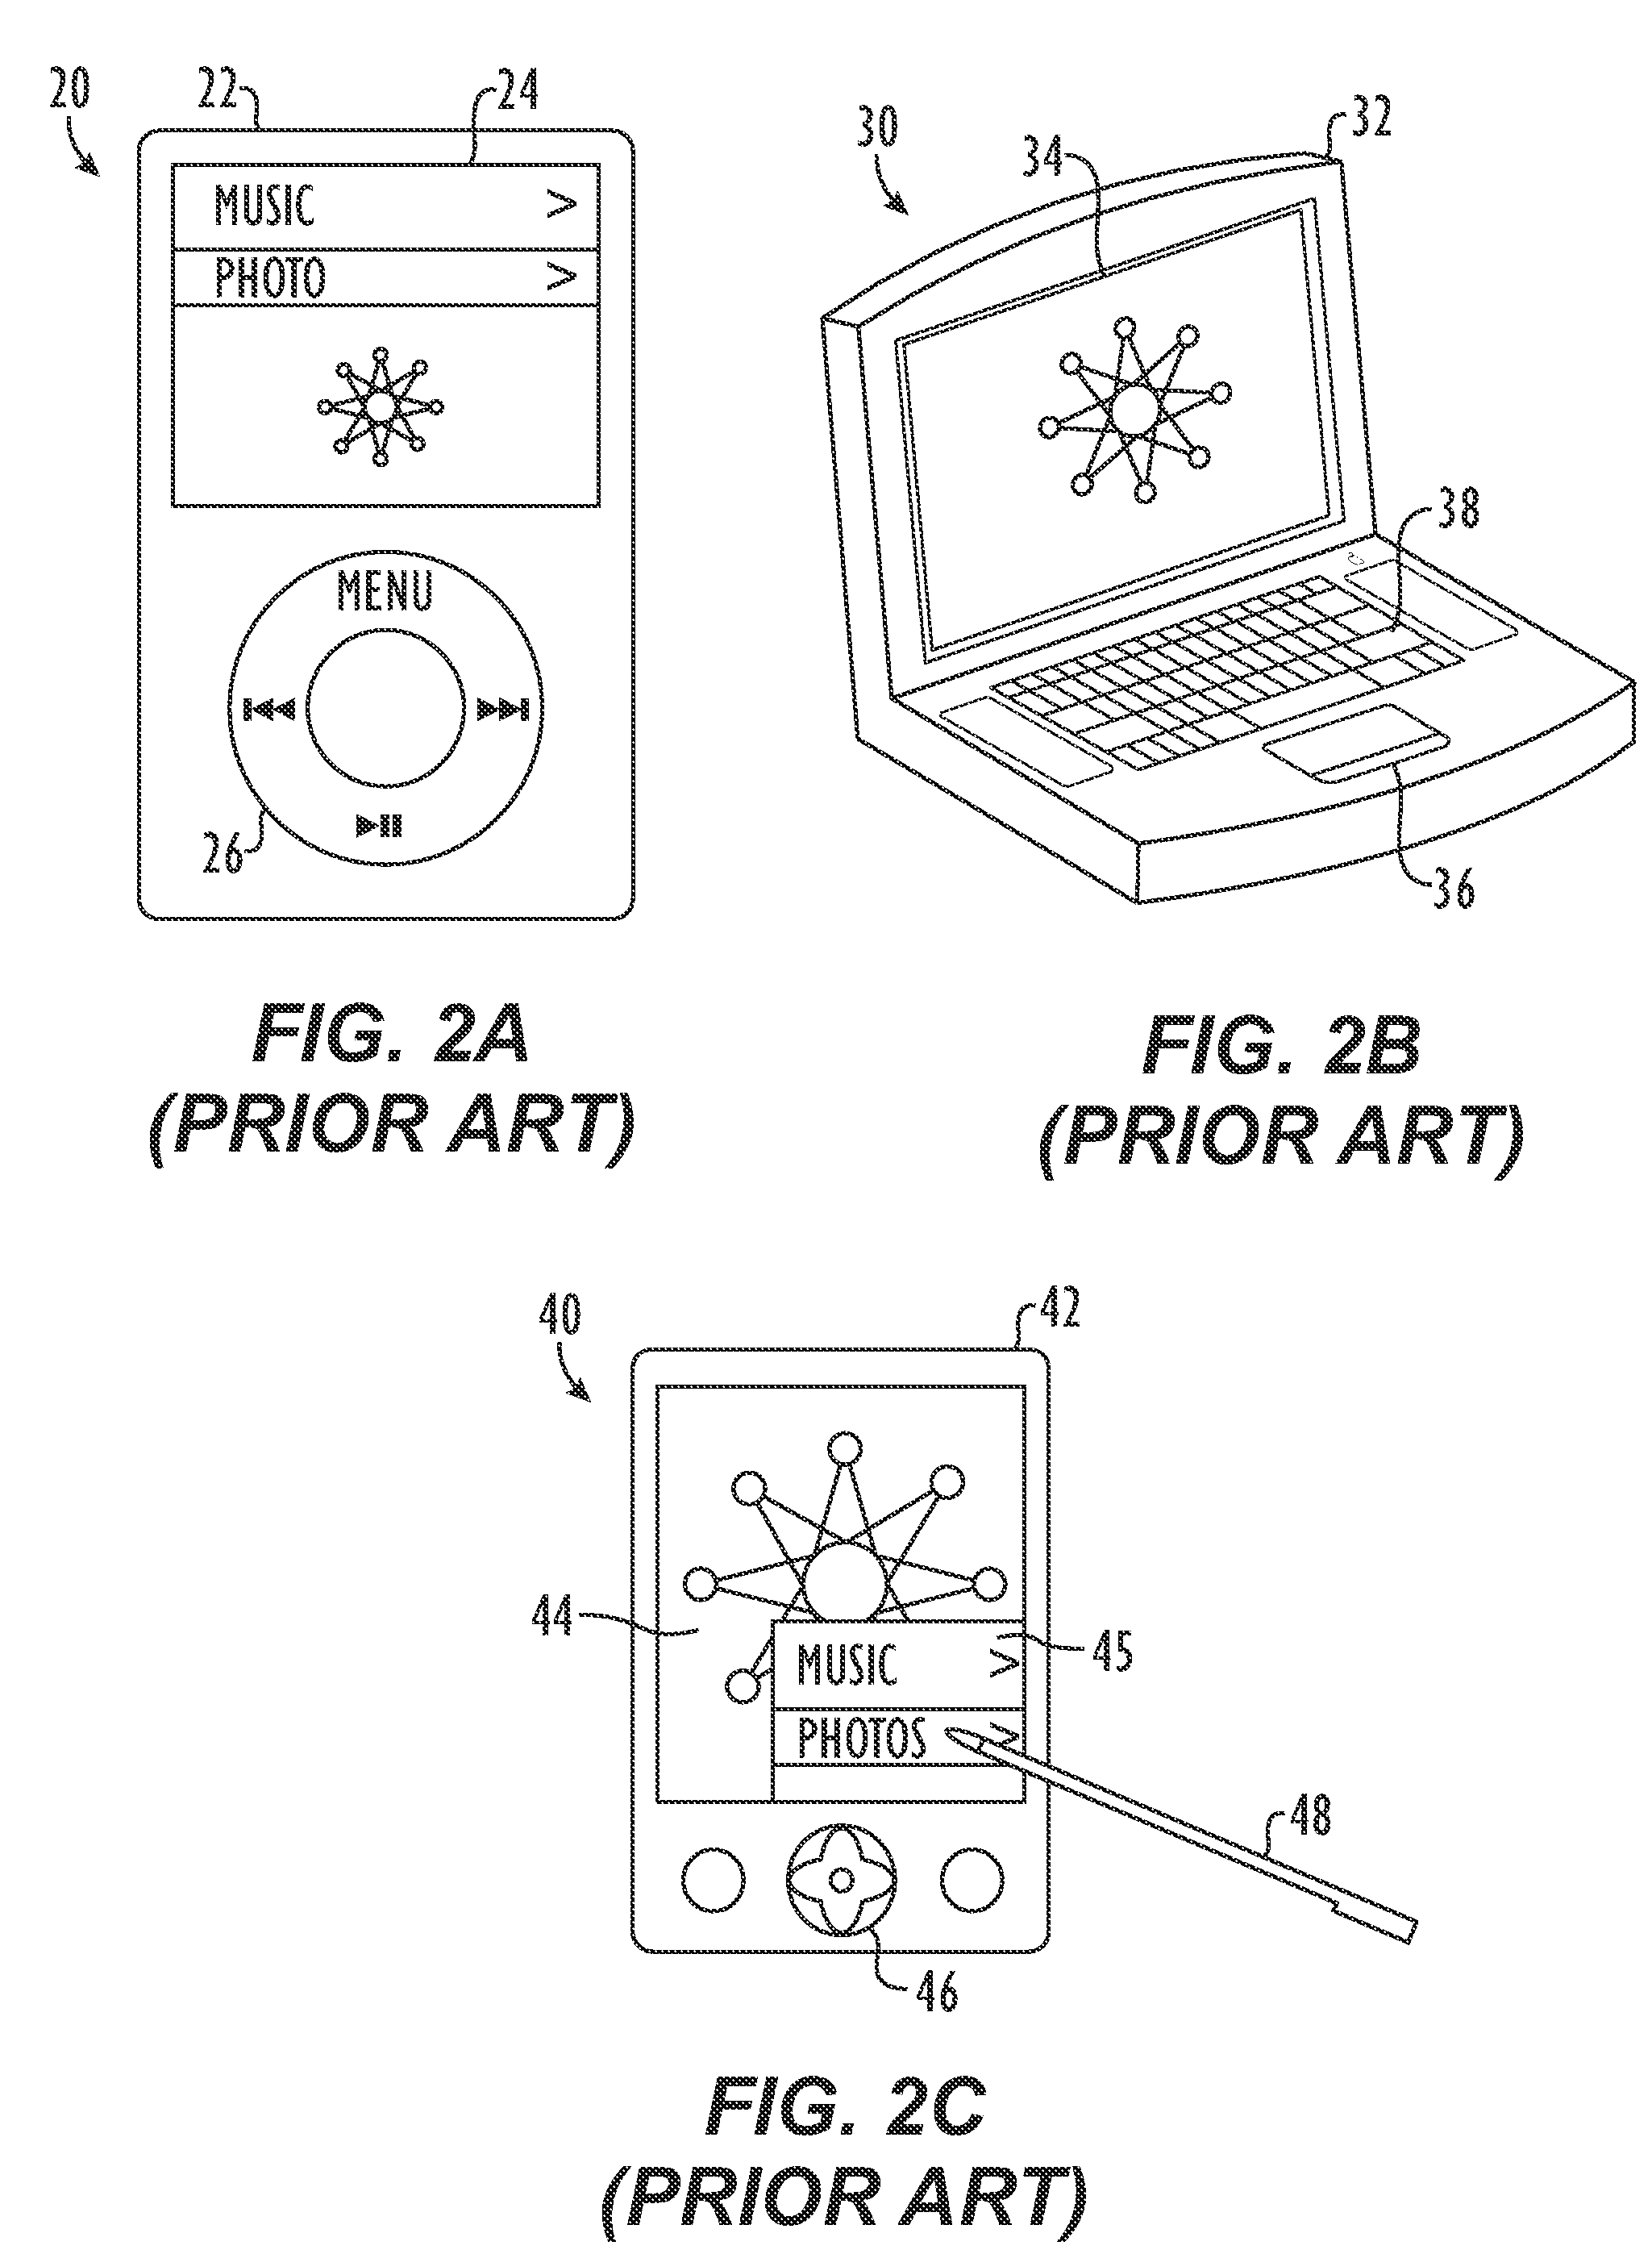 Electronic Device Having Display and Surrounding Touch Sensitive Bezel for User Interface and Control